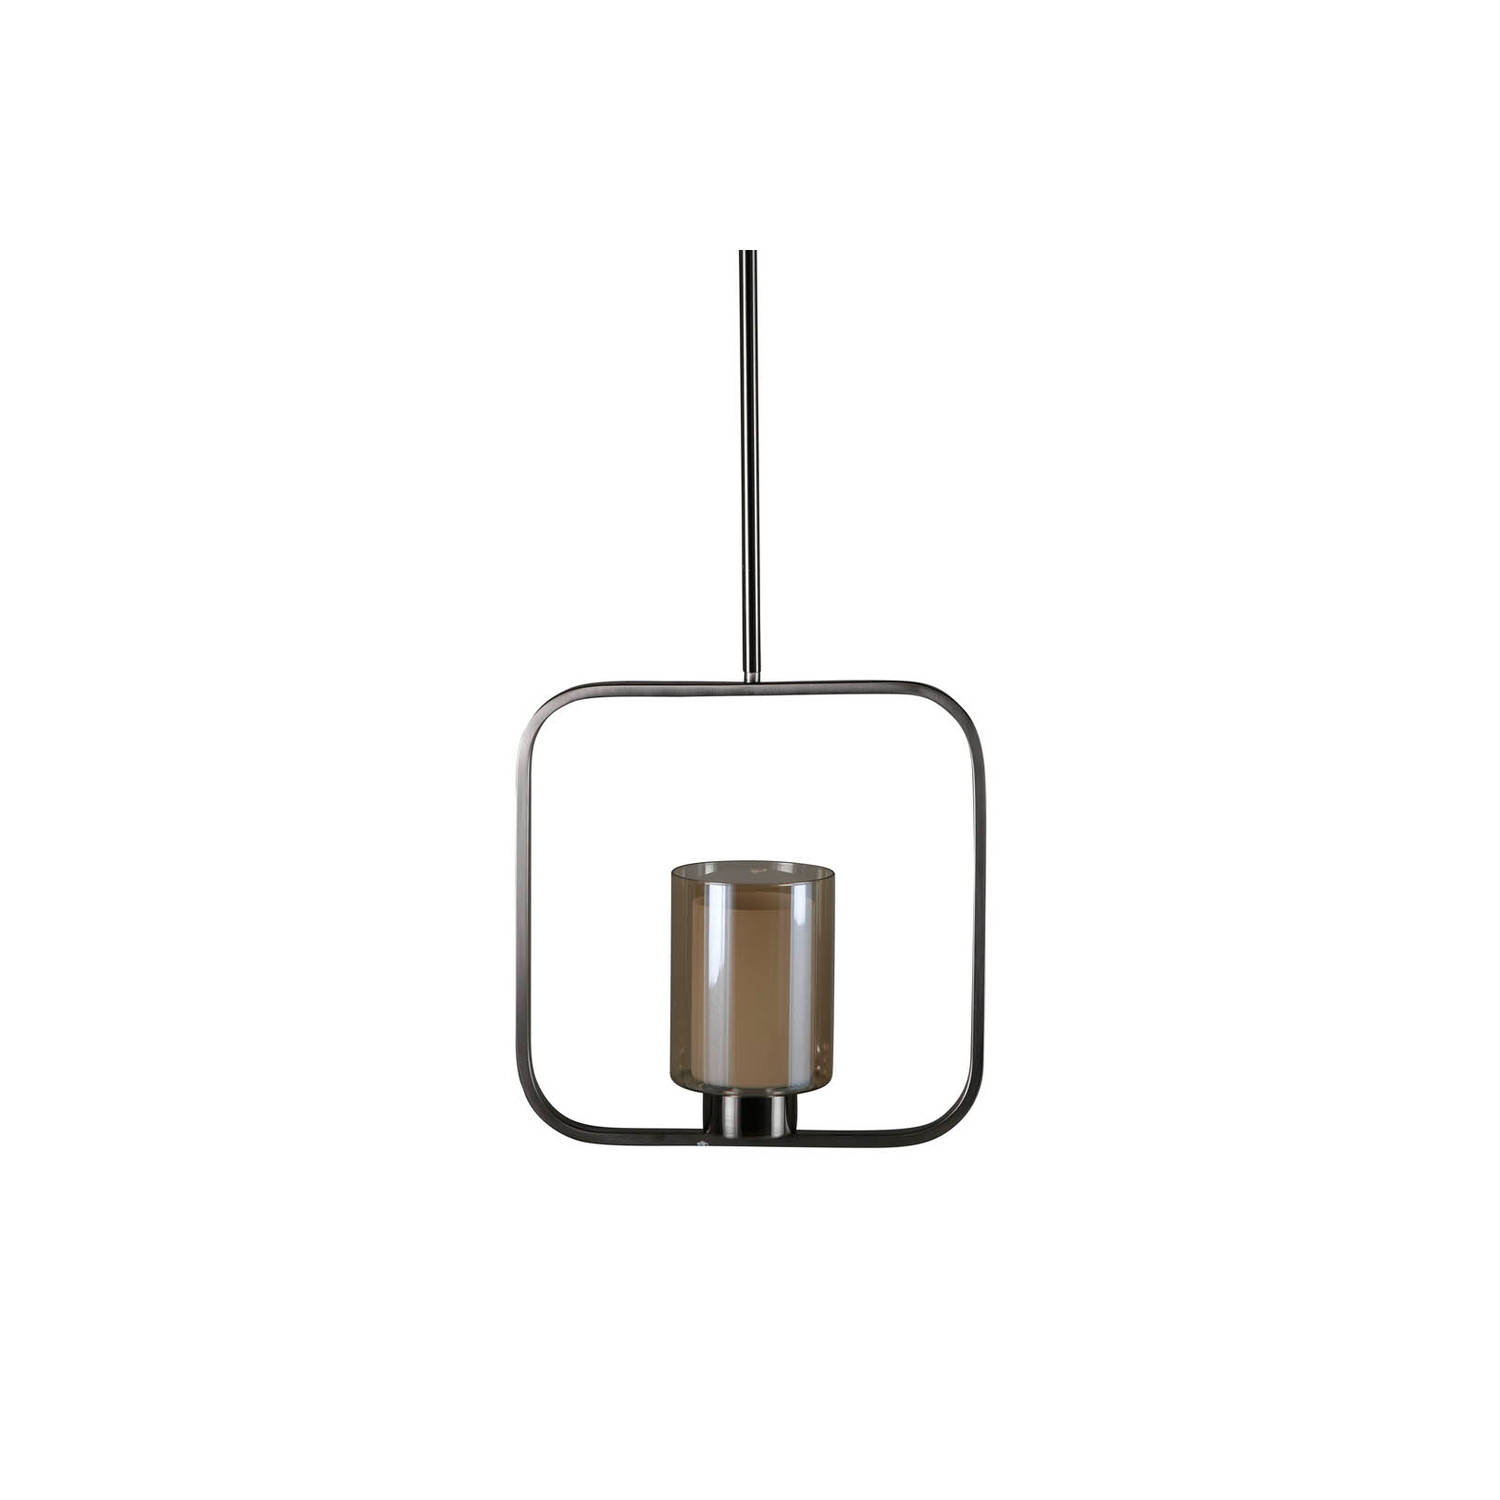 Hioshop Aludra verlichting hanglamp 34x12x34cm glas, staal